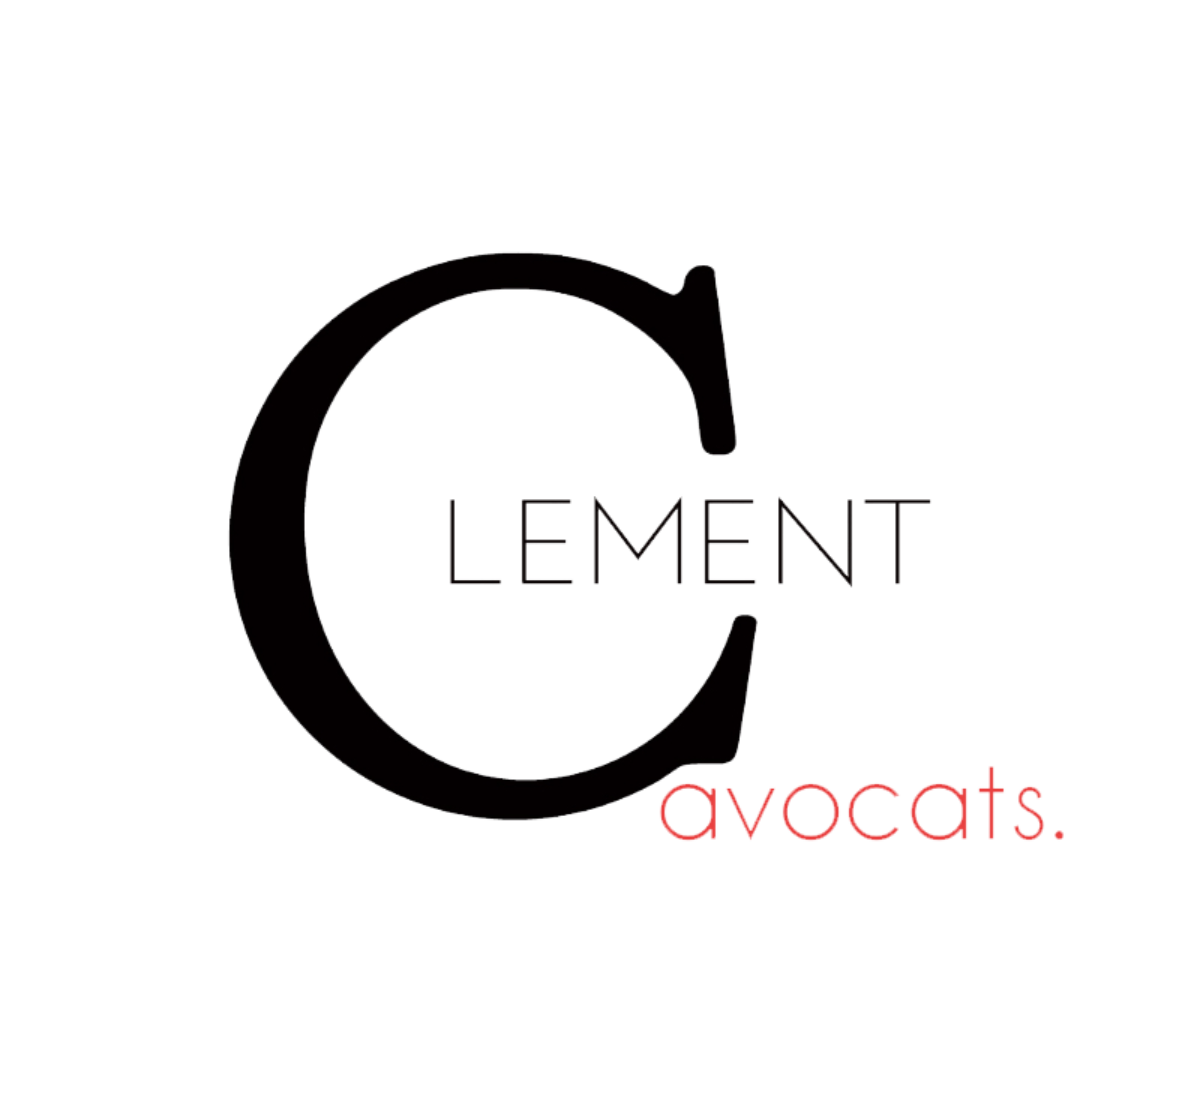 cropped-CLEMENT-avocat-3024x957transpa-1-1.png